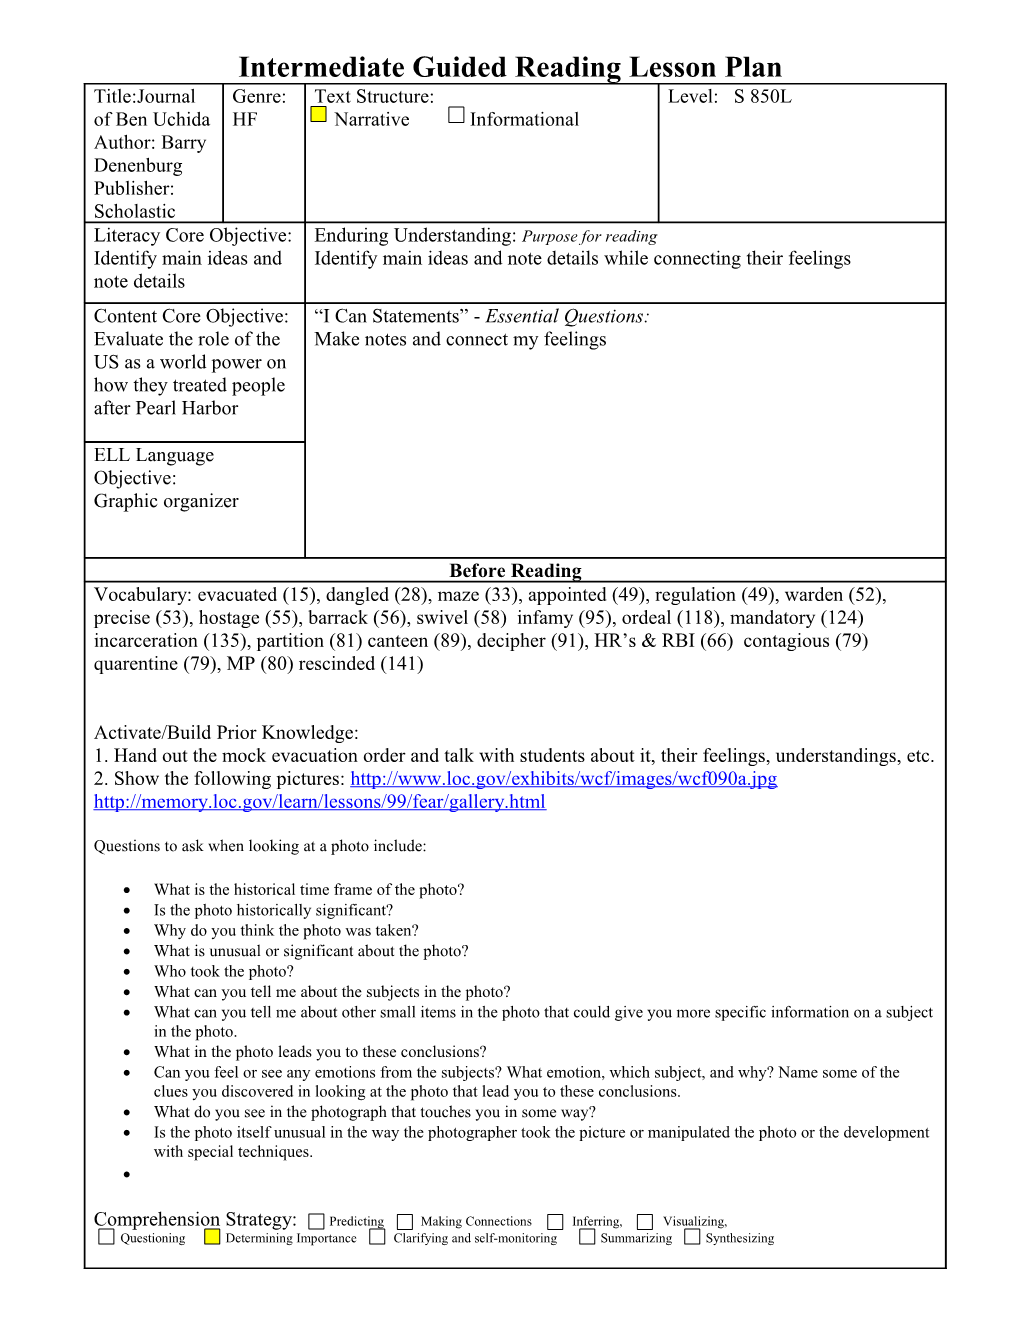 Primary Guided Reading Lesson Plan s5